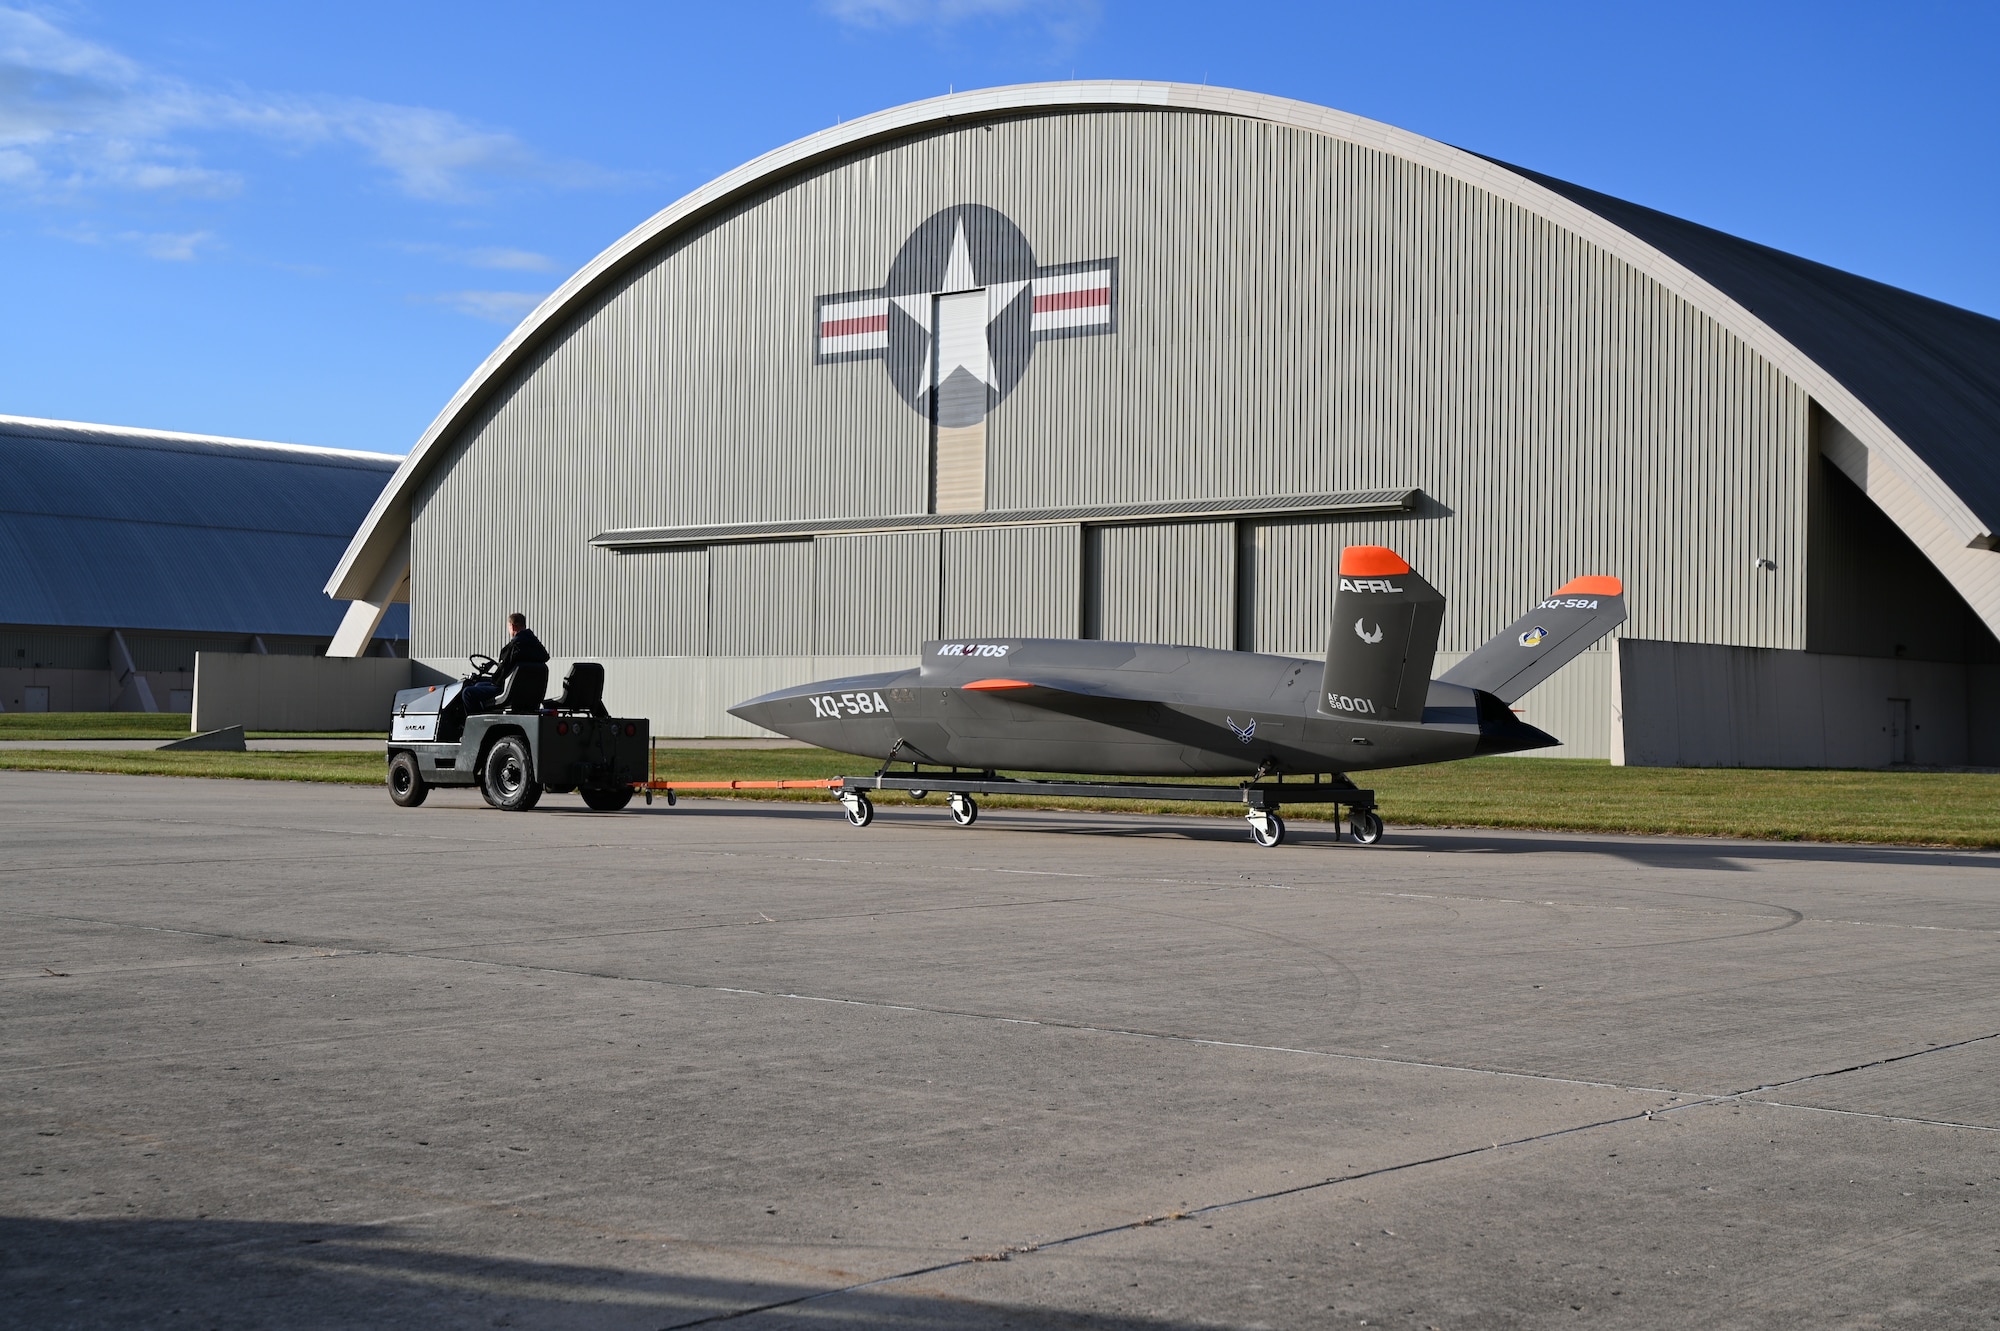 XQ-58A Valkyrie aircraft towed to National Museum USAF.